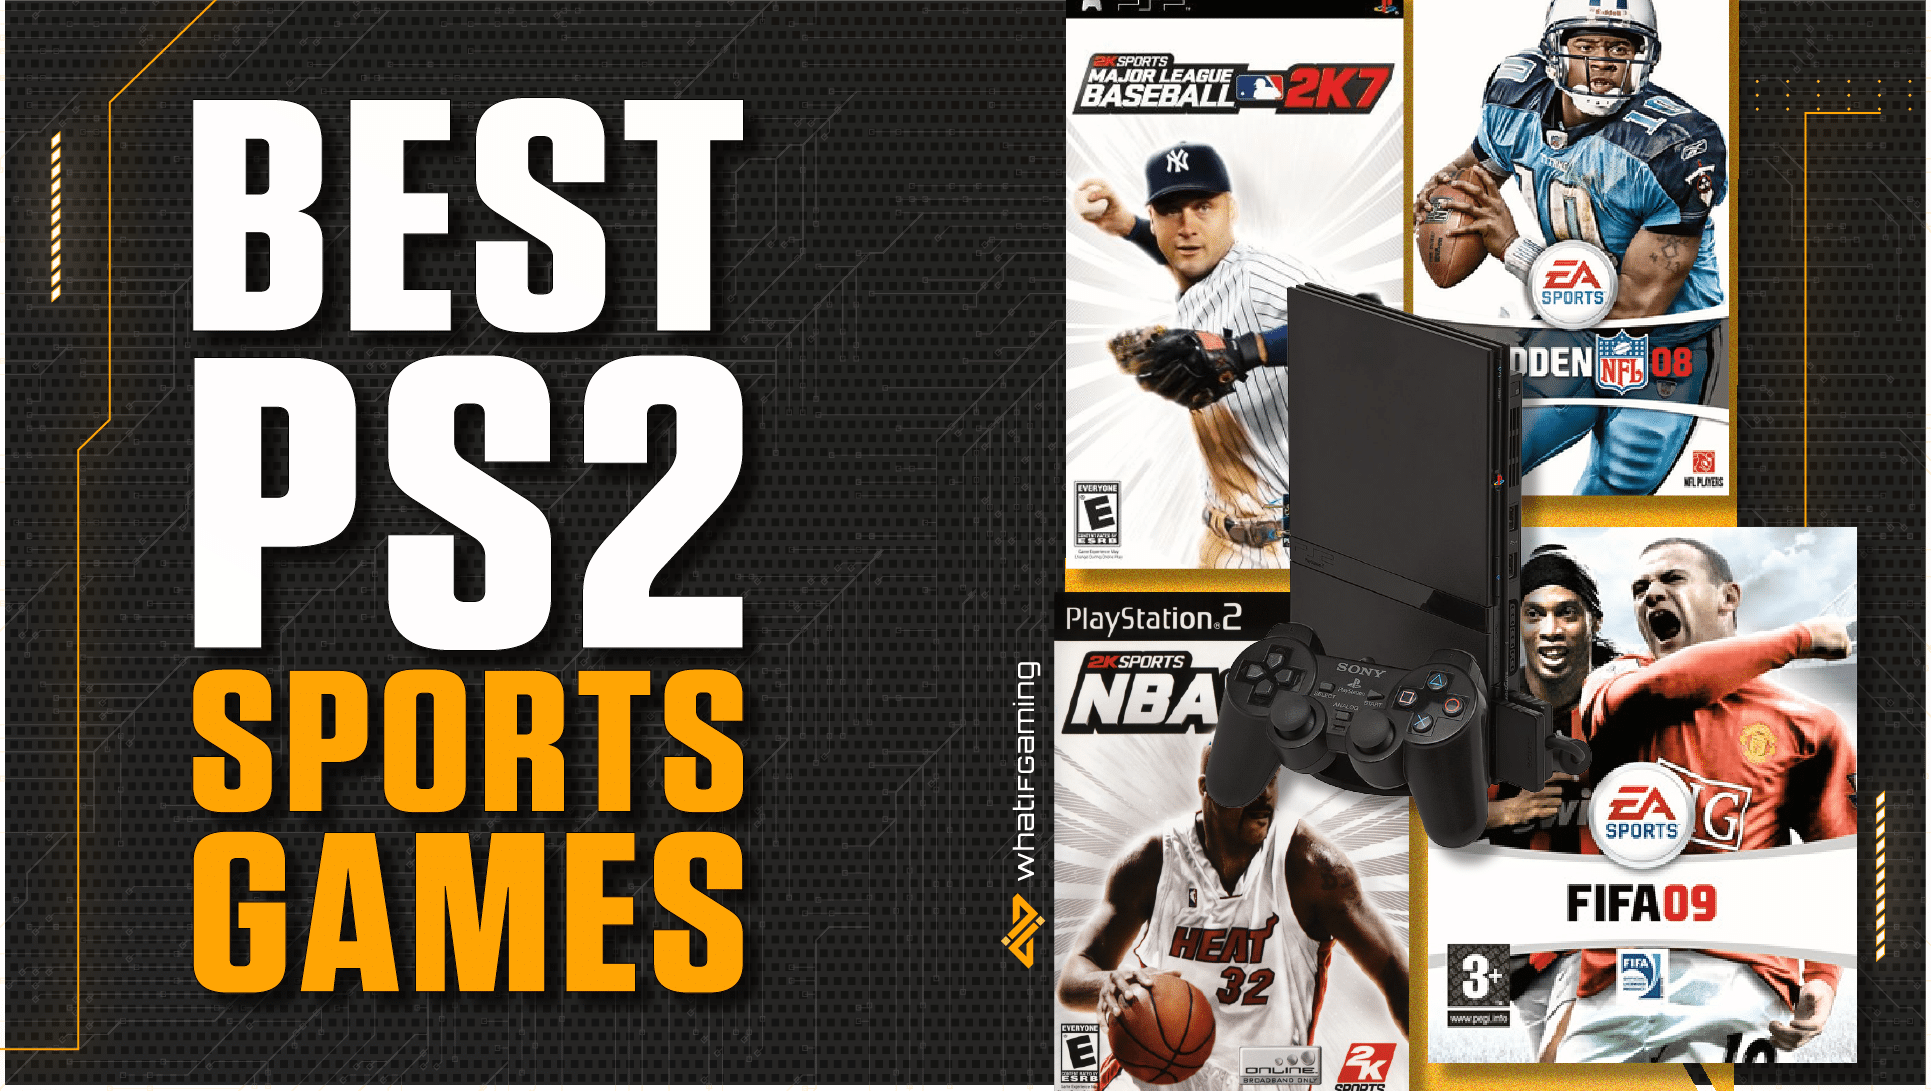 The Top 10 Sports Games Ever On Playstation 2, As Voted For By   Readers